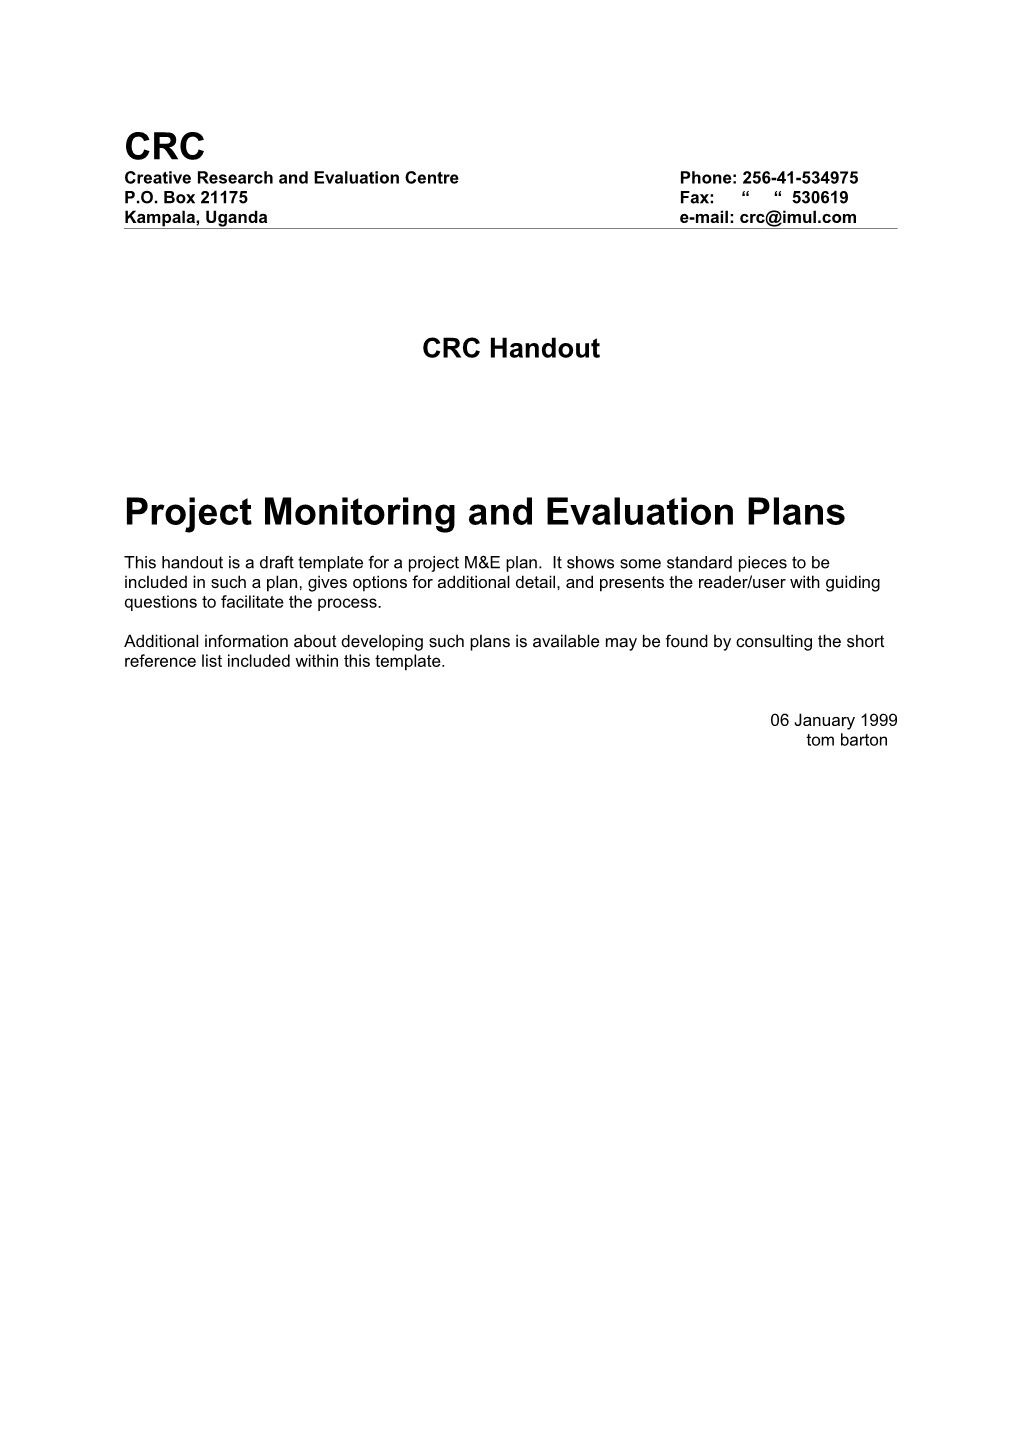 Project Monitoring And Evaluation Plans_CRC Handout